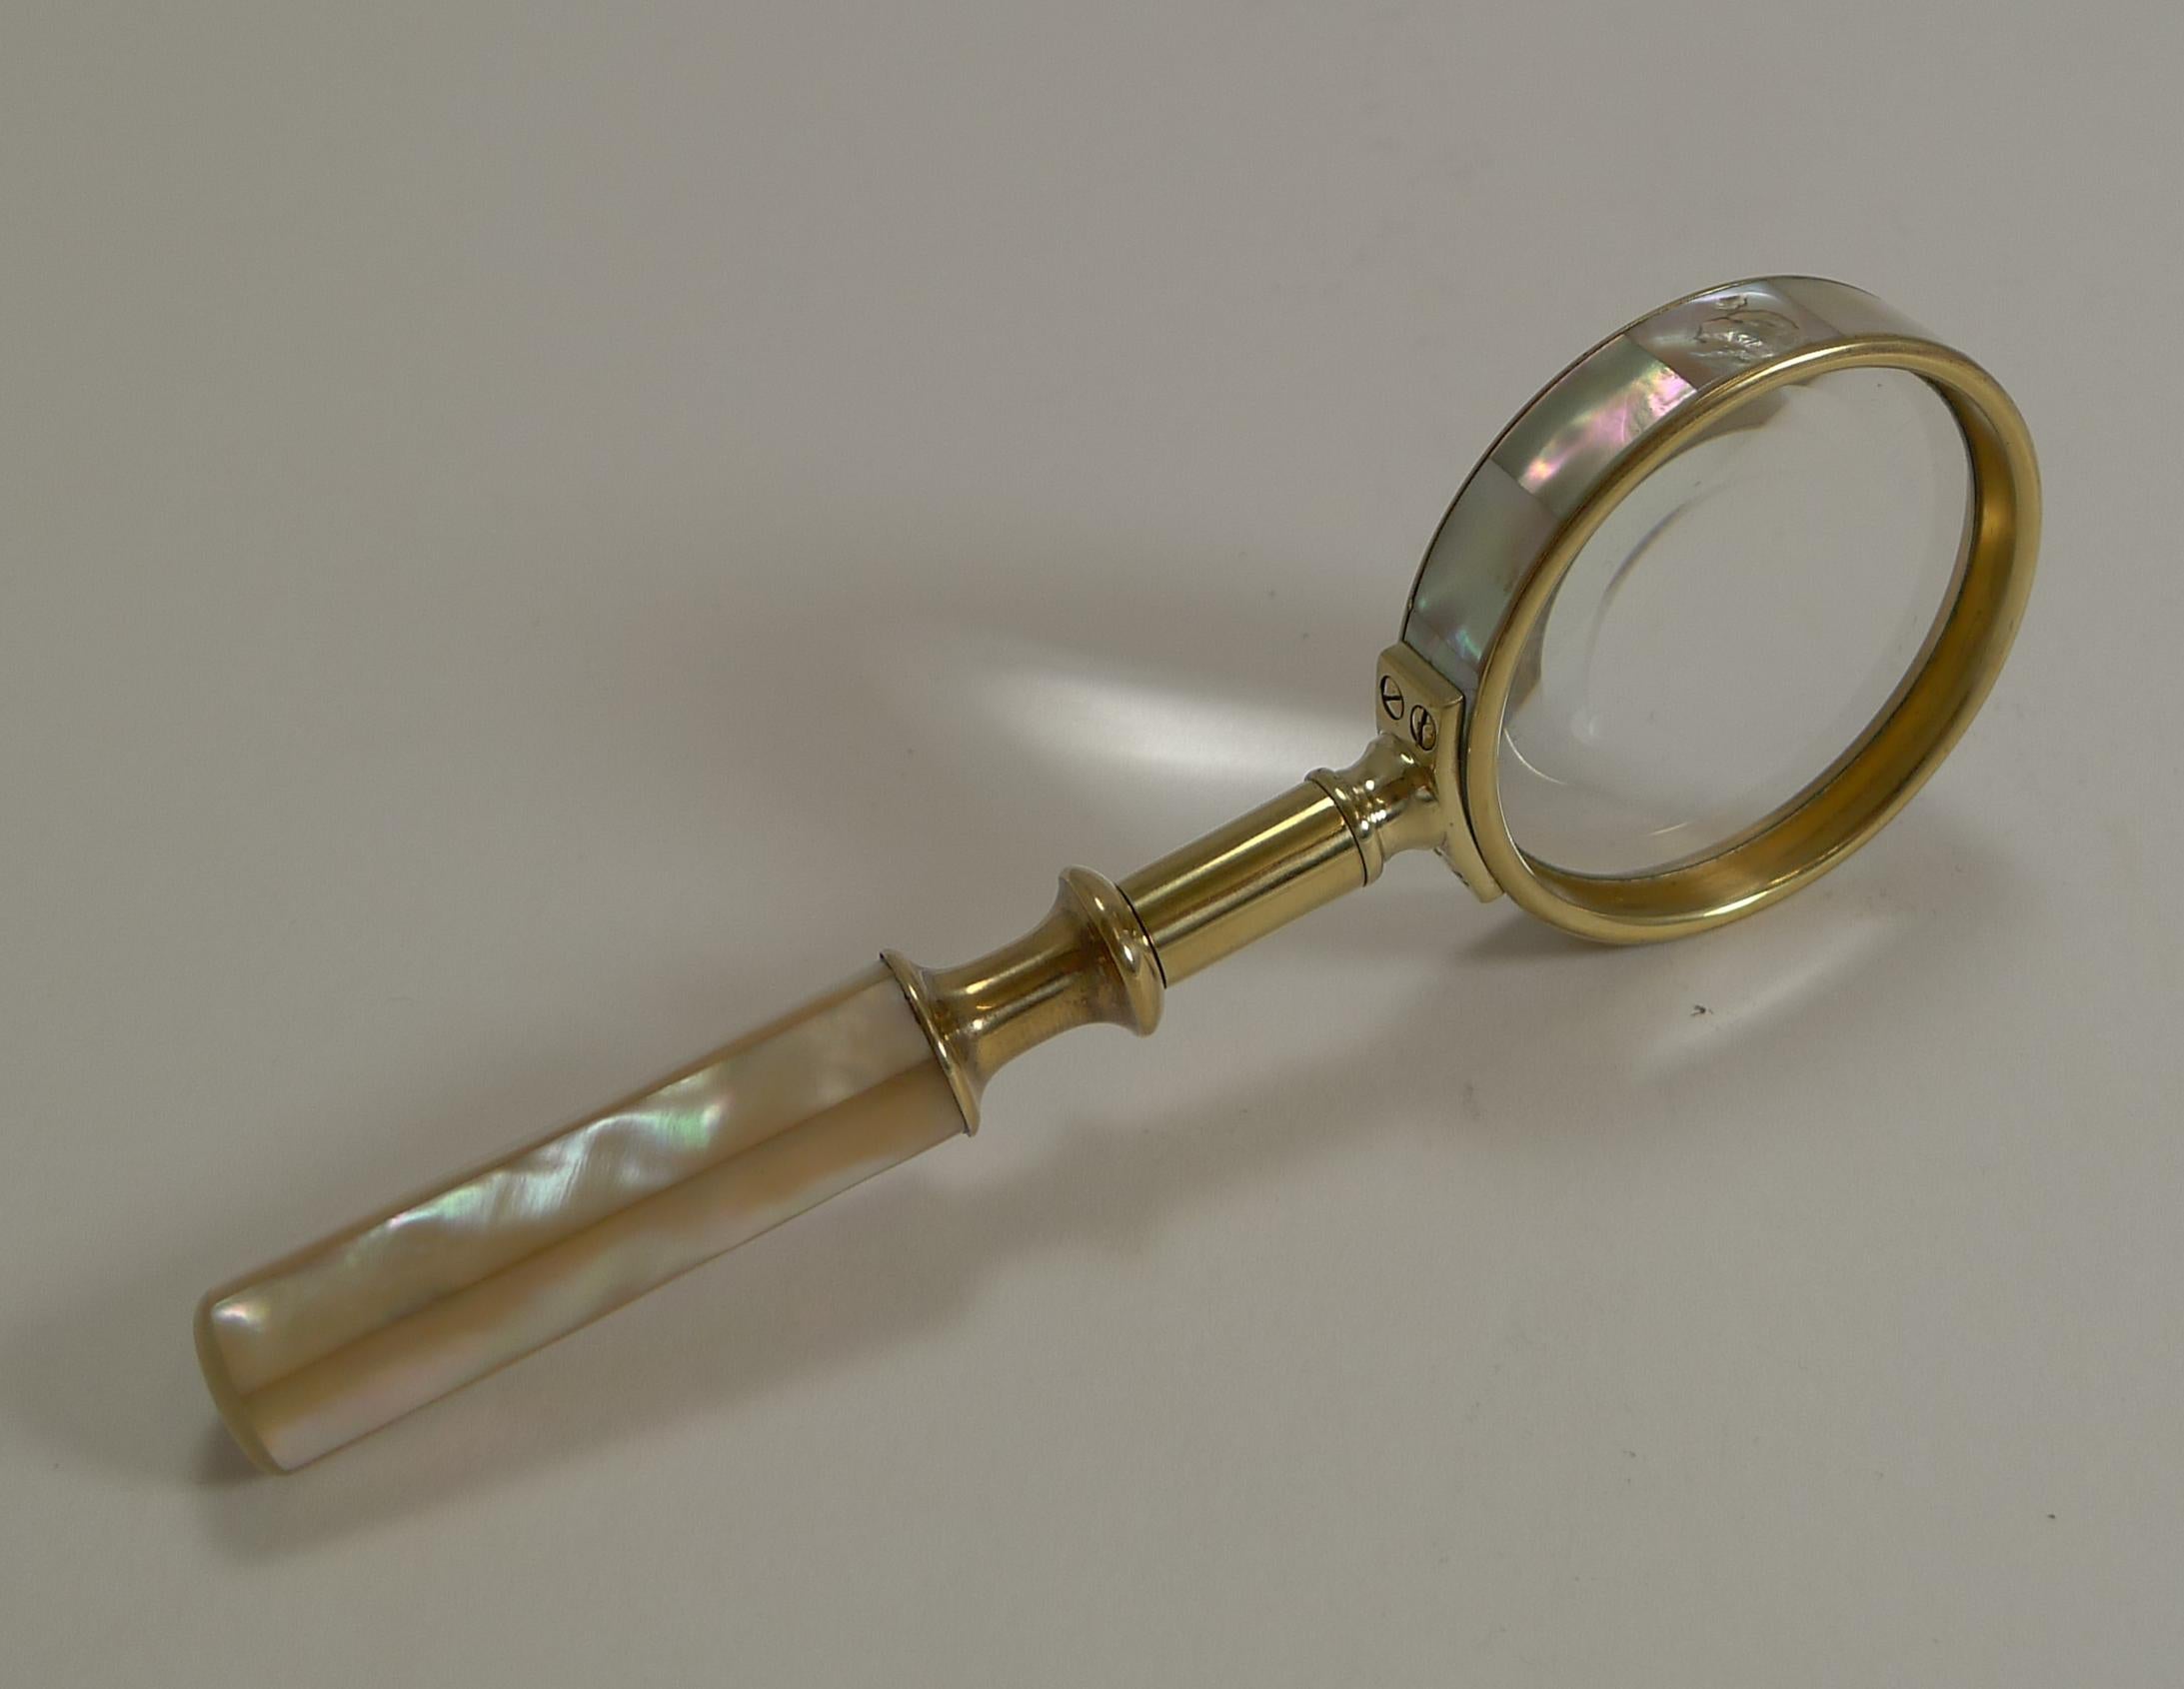 A small and versatile example, elegant for the desk top but still small enough to take out and about.

Made from solid English brass with a good quality screwed construction, the handle and the outside of the lens are both covered in tiles of